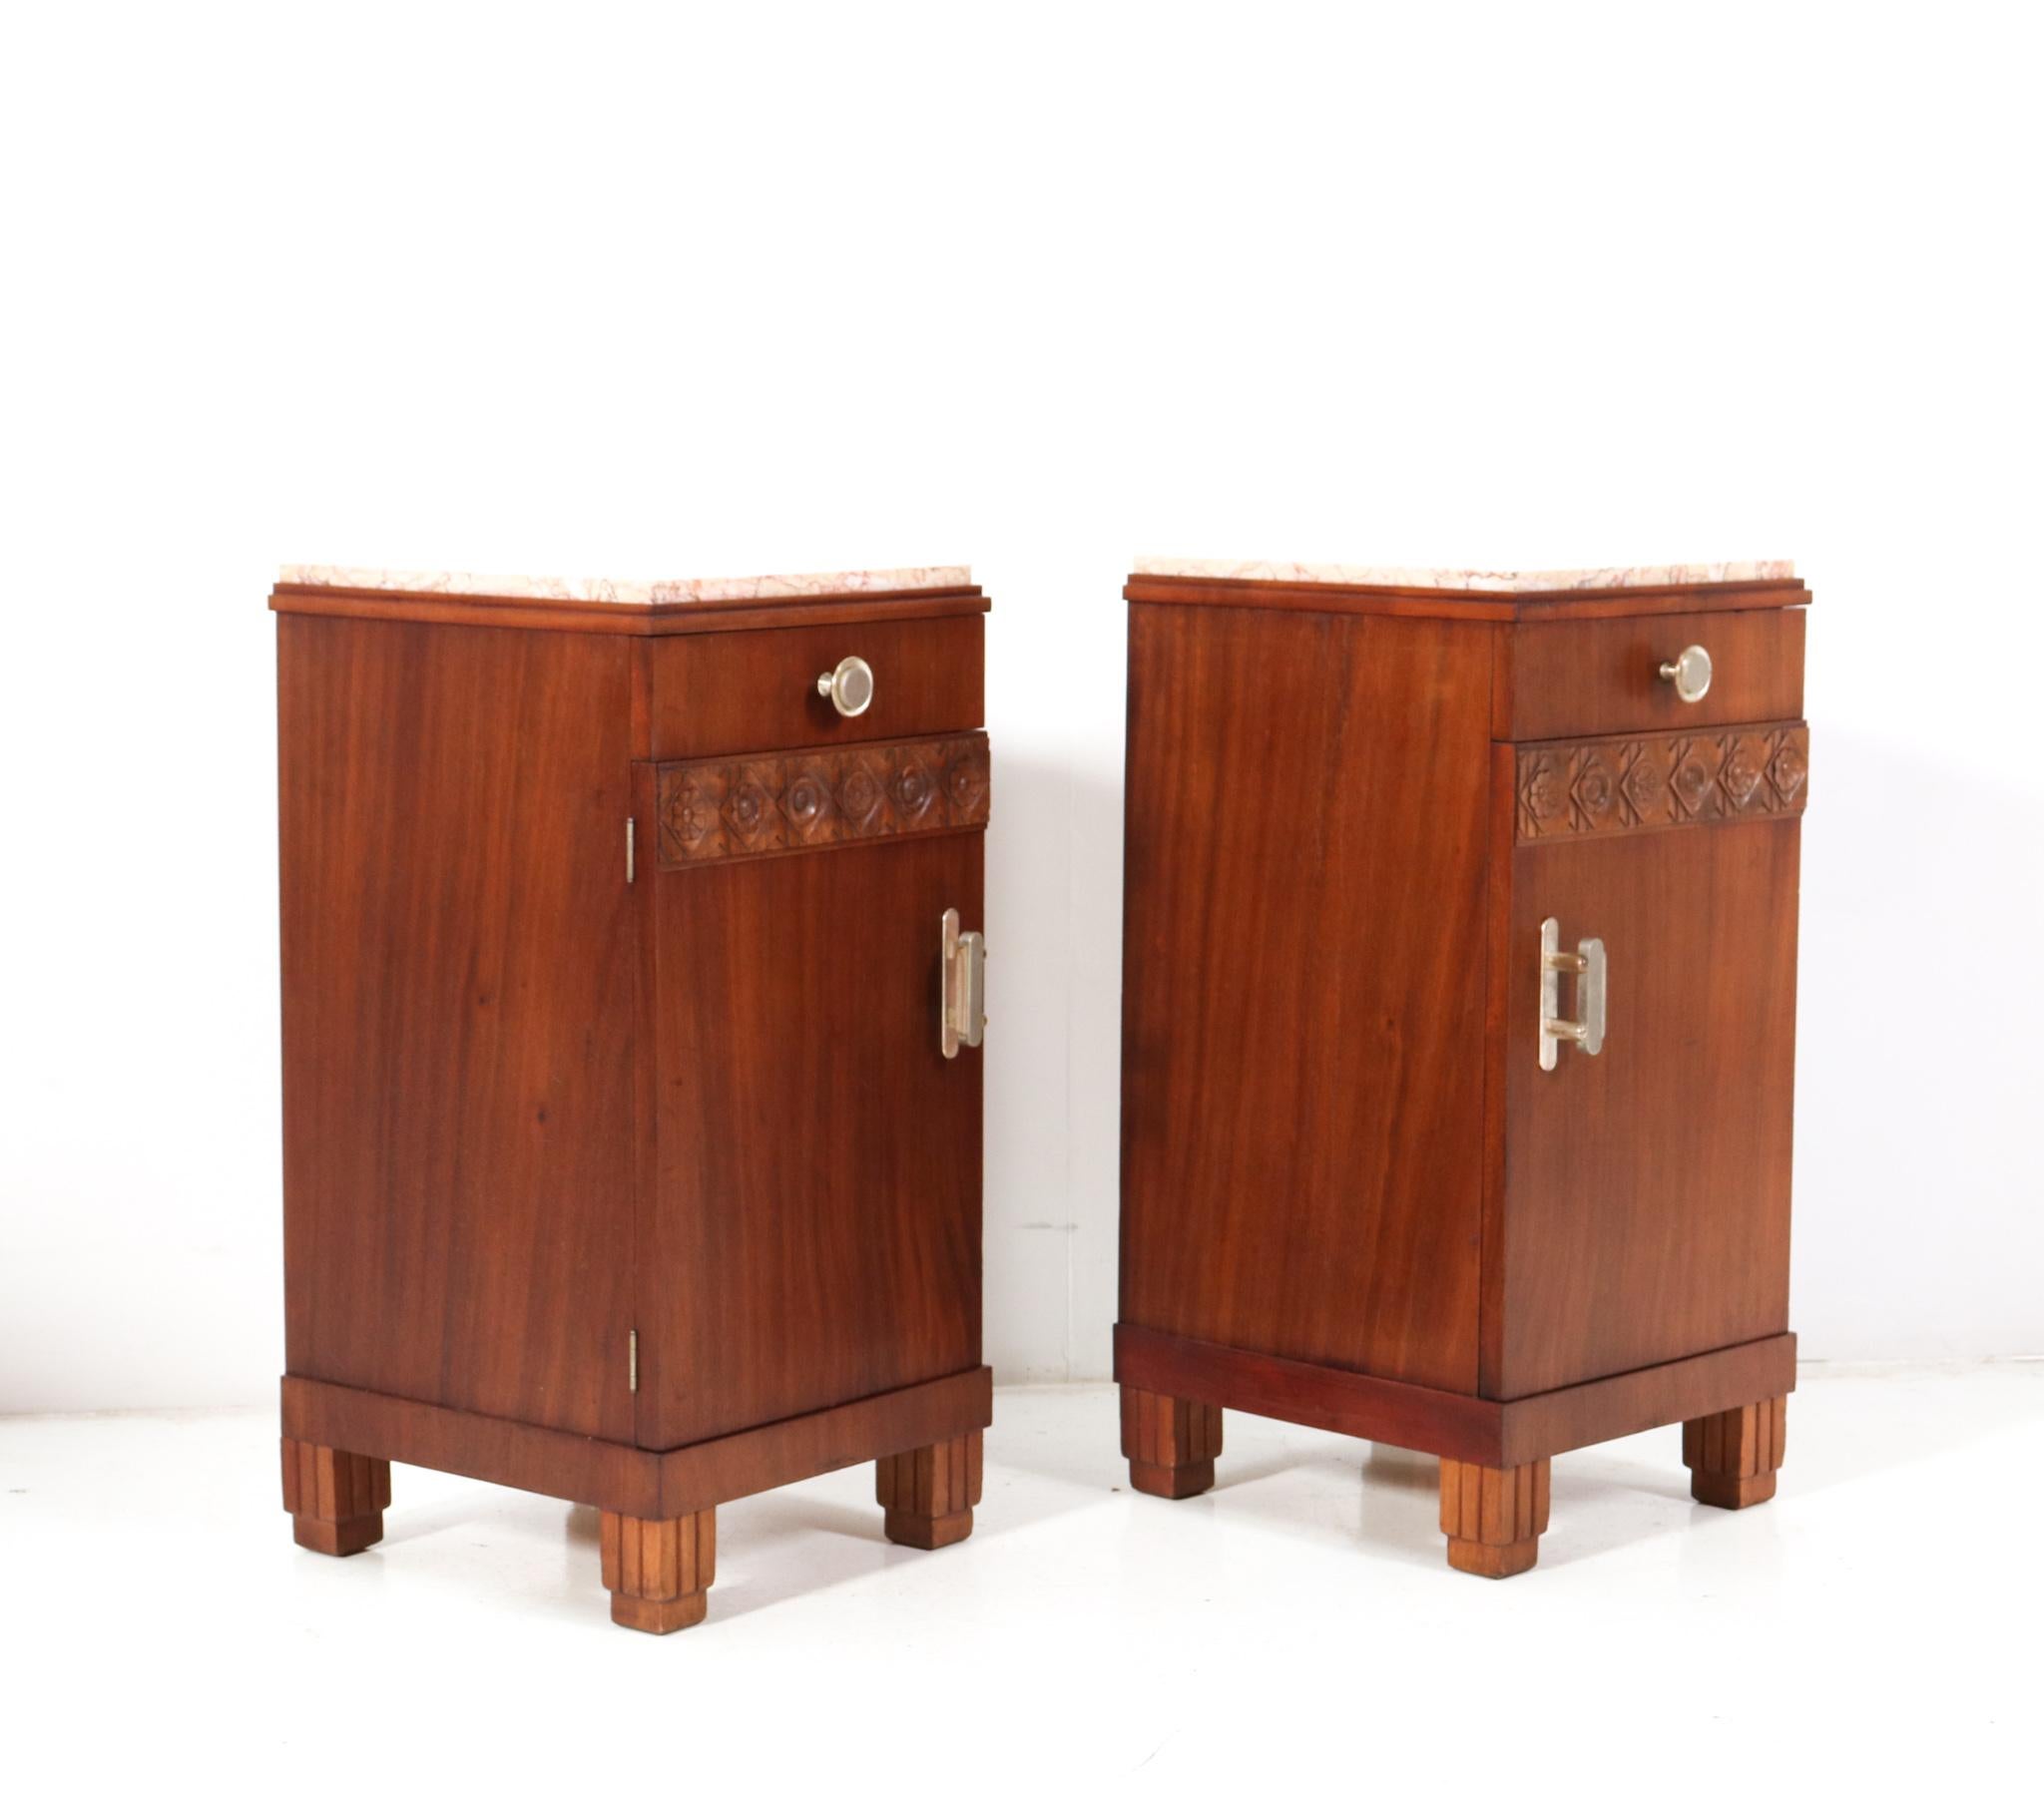 Two Walnut Art Deco Nightstands or Bedside Tables, 1930s For Sale 2